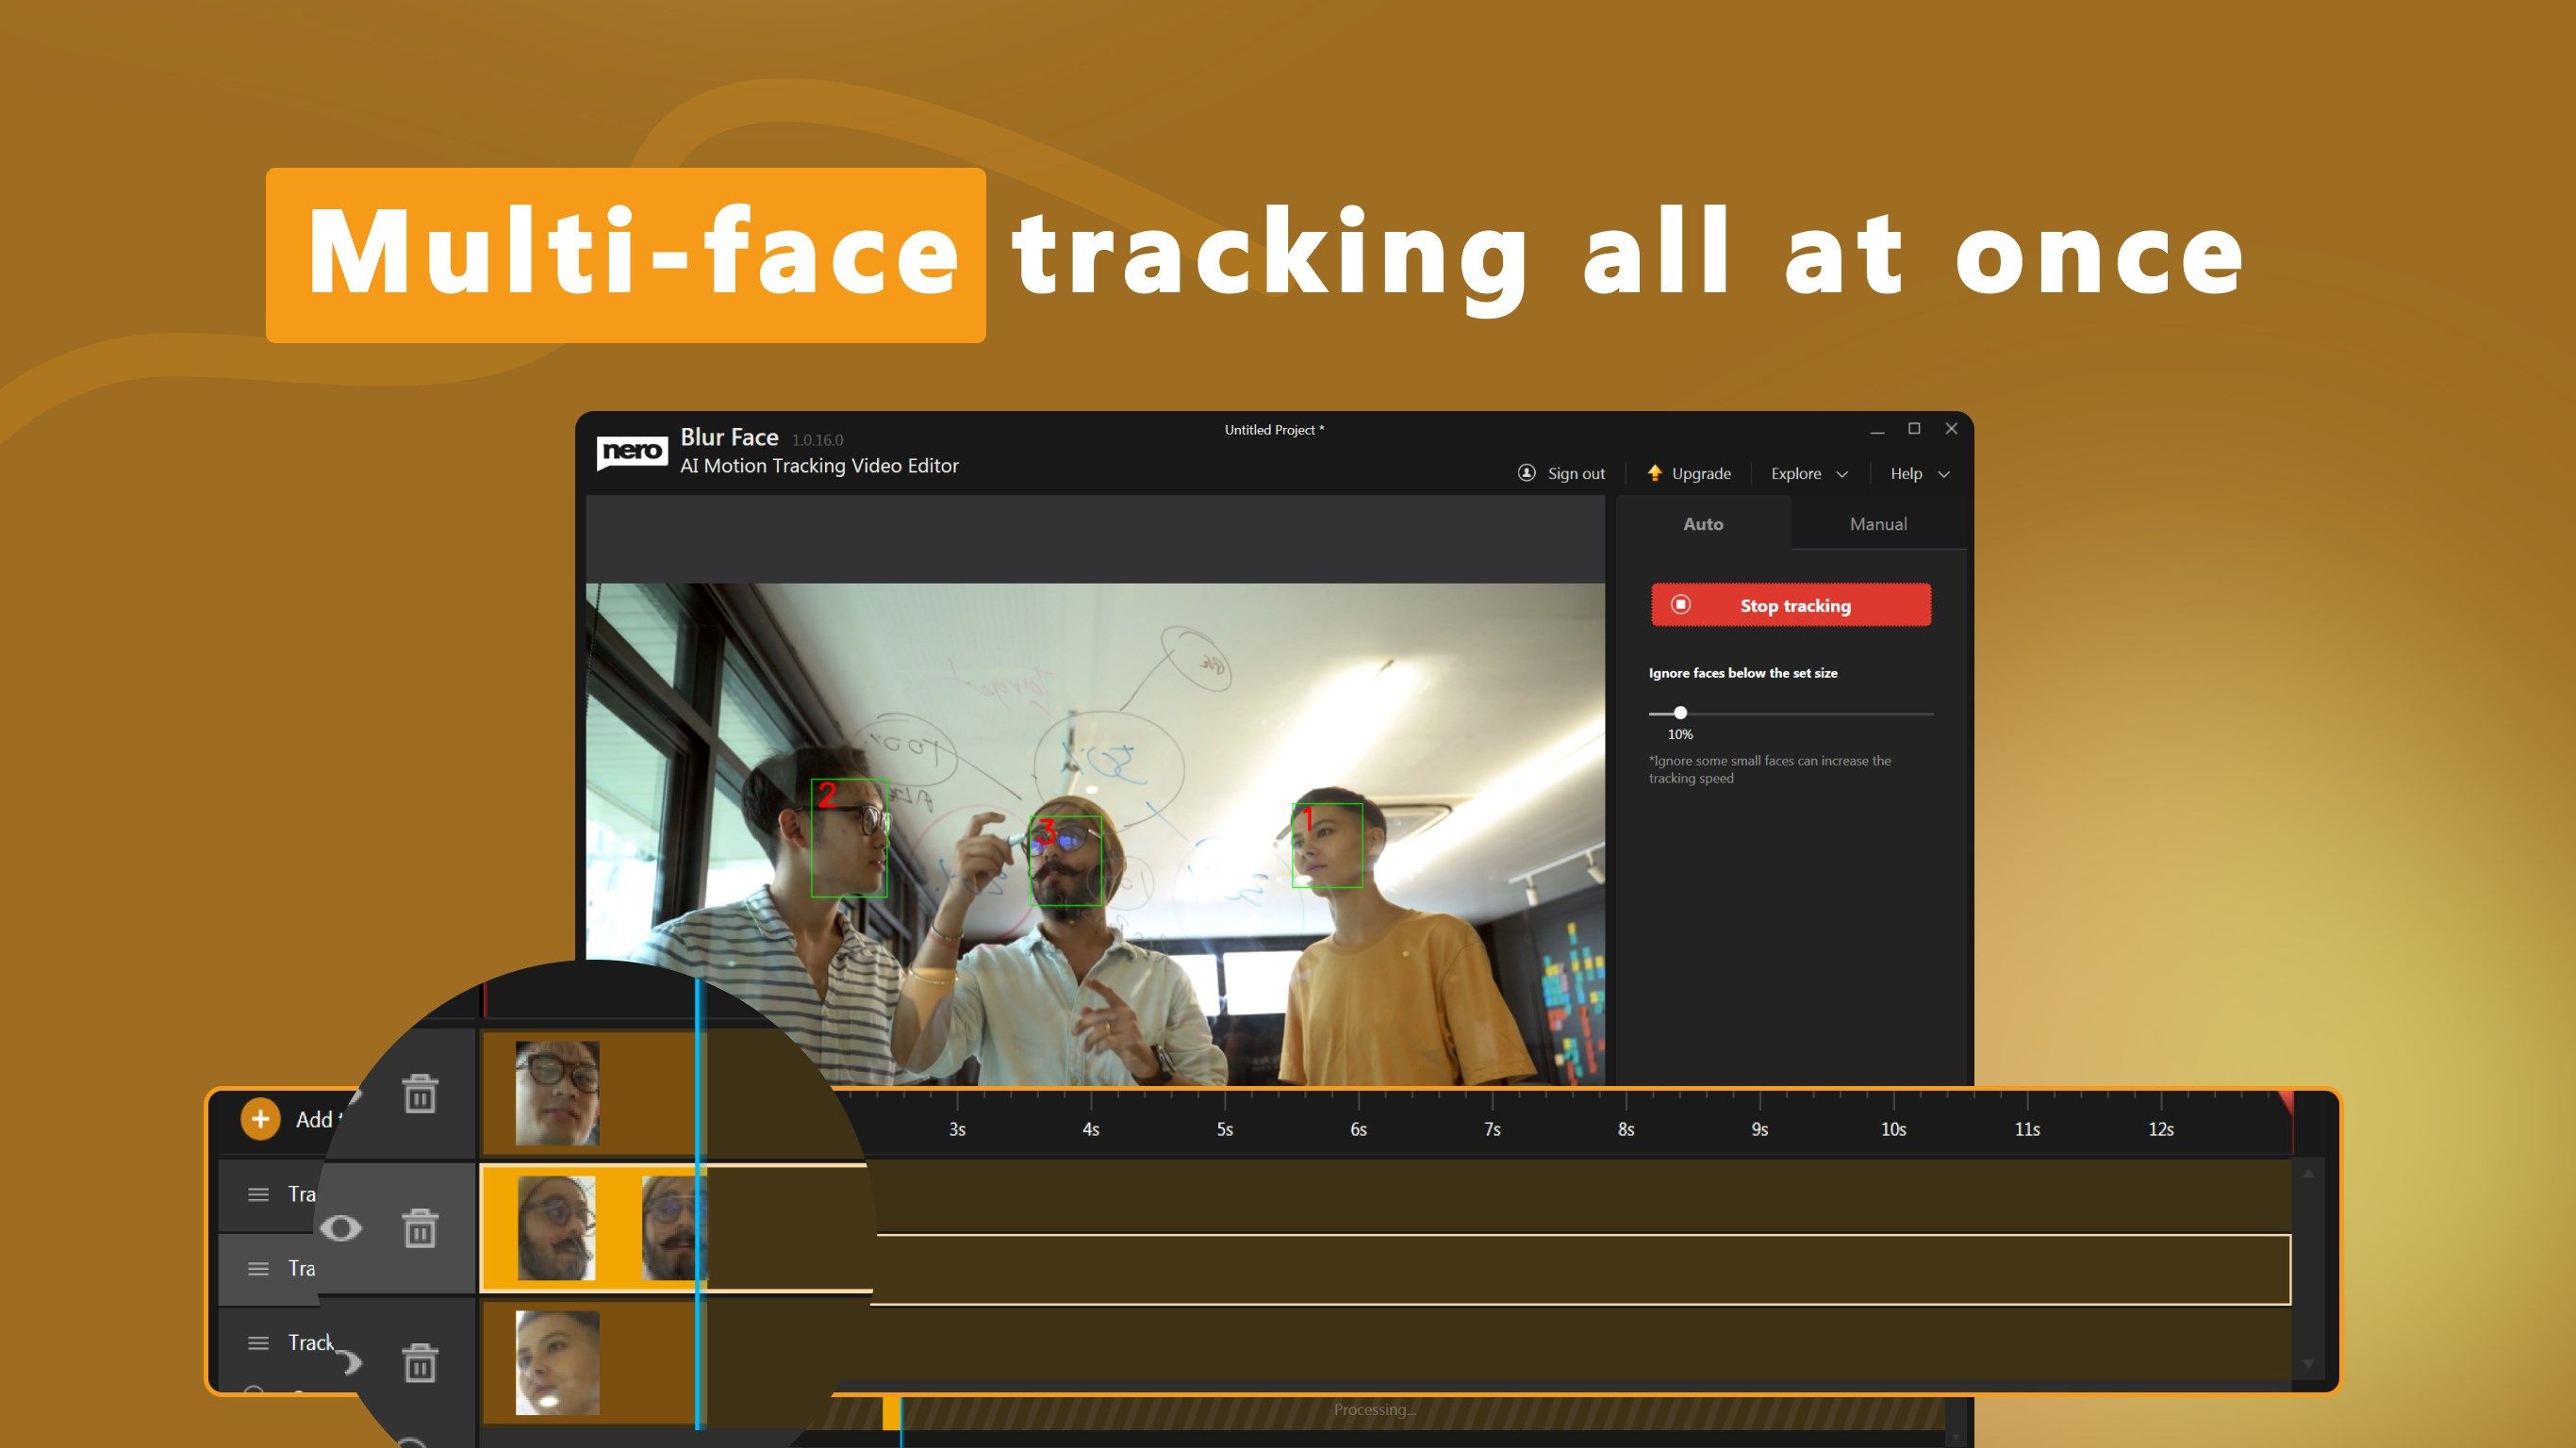 Blur Face - AI Motion Tracking Video Editor